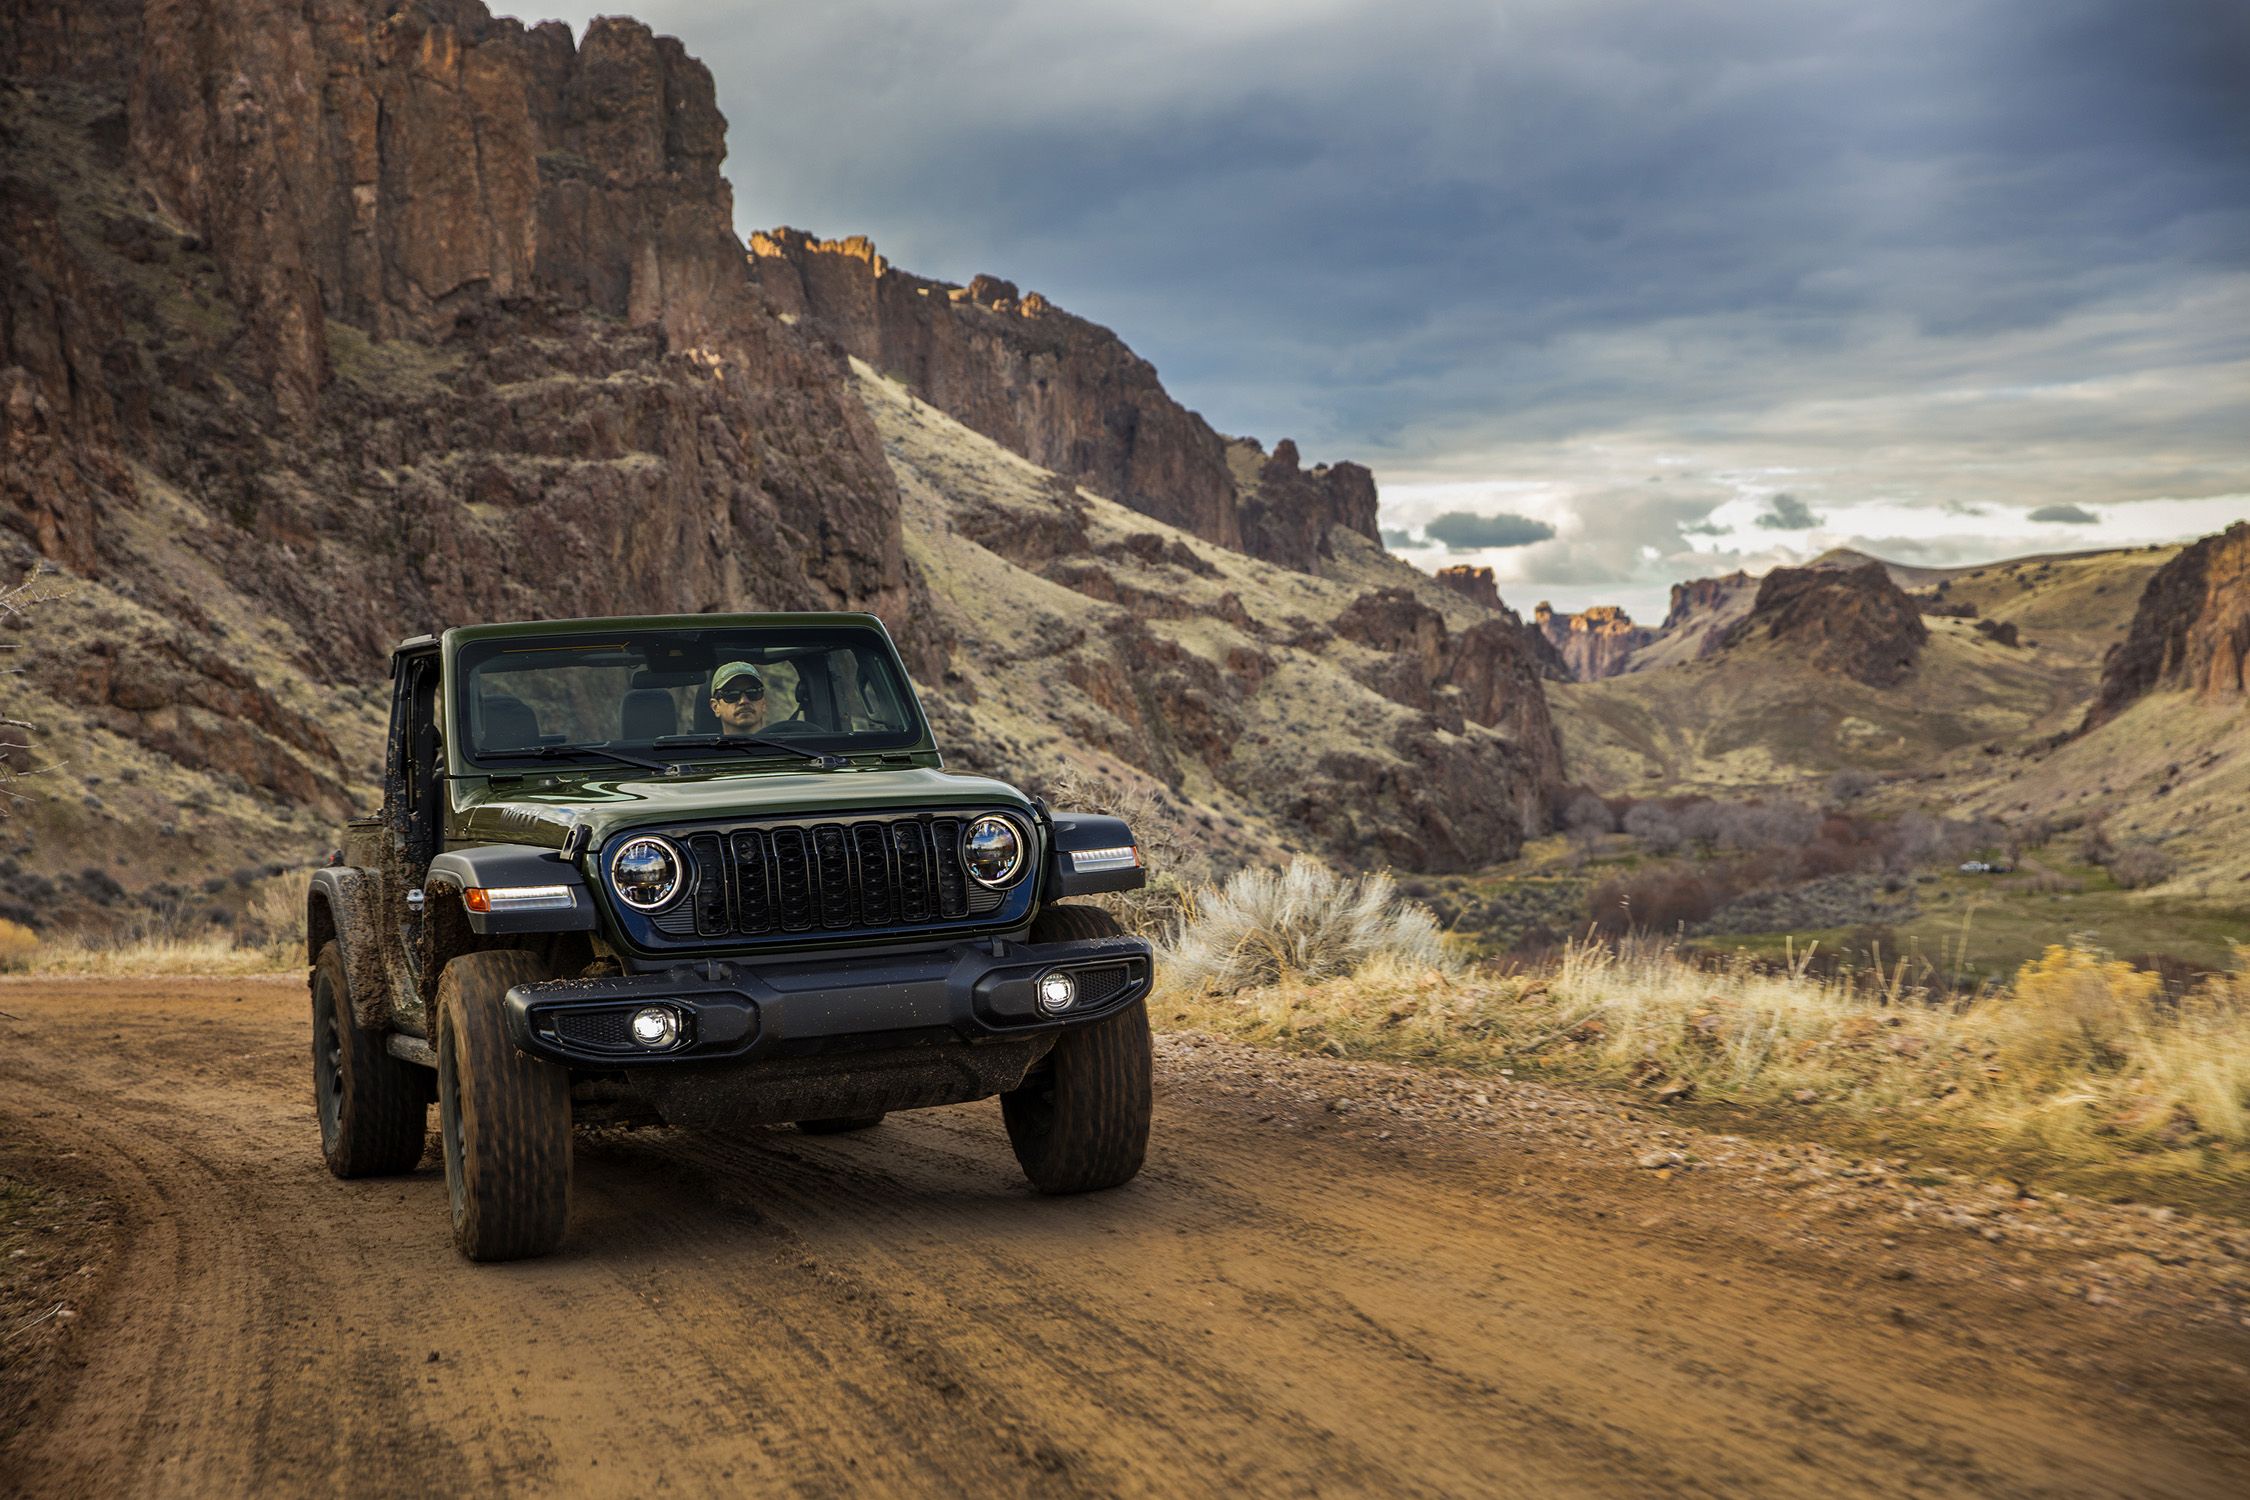 Off-Road Prowess - Why the Jeep Wrangler Remains a Top Choice for American Drivers